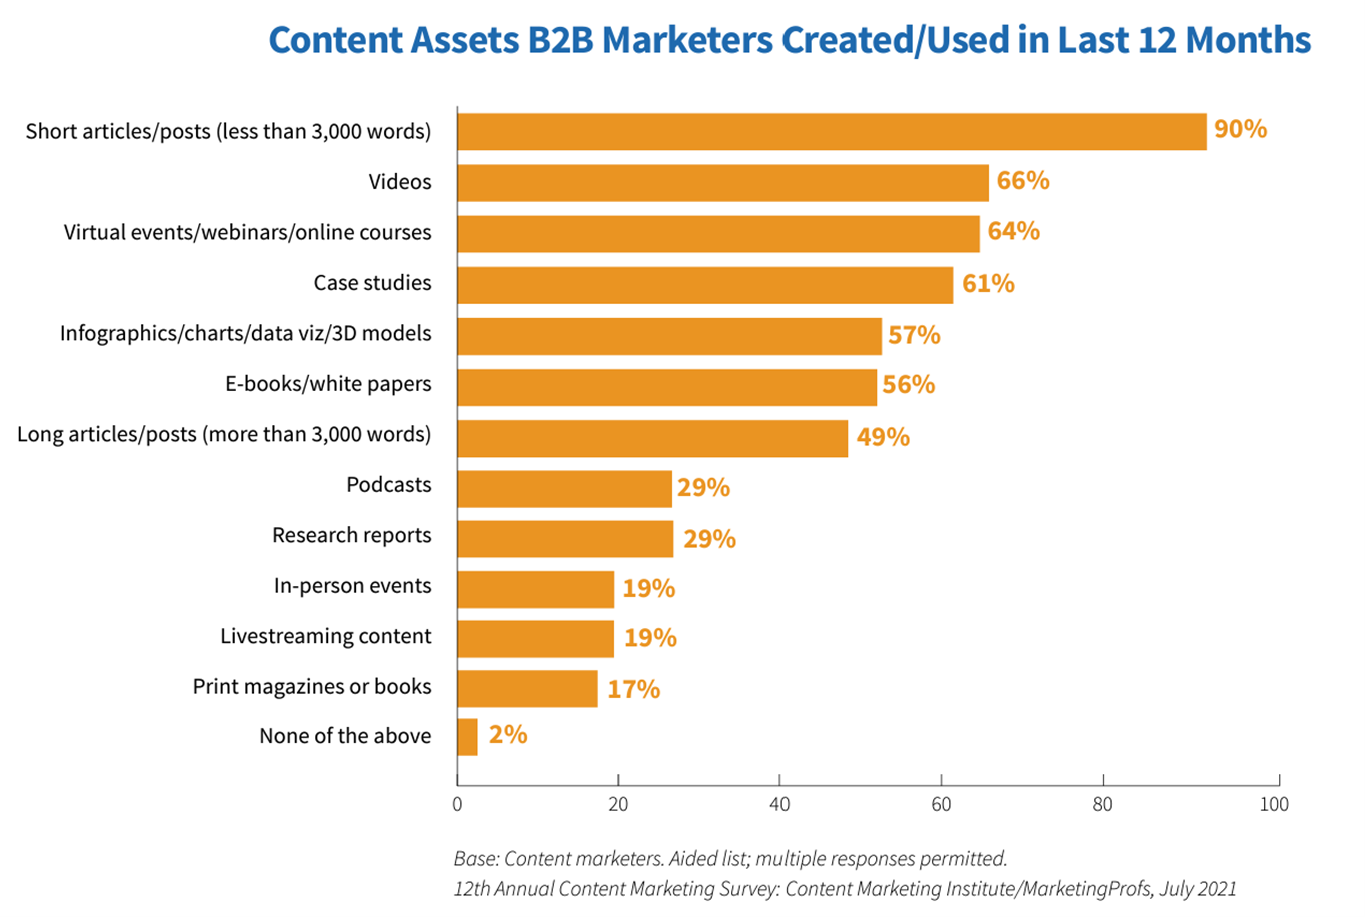 Bar graph of Content Assets B2B Marketers created or used in last 12 months - highest short articles with 3,000 words